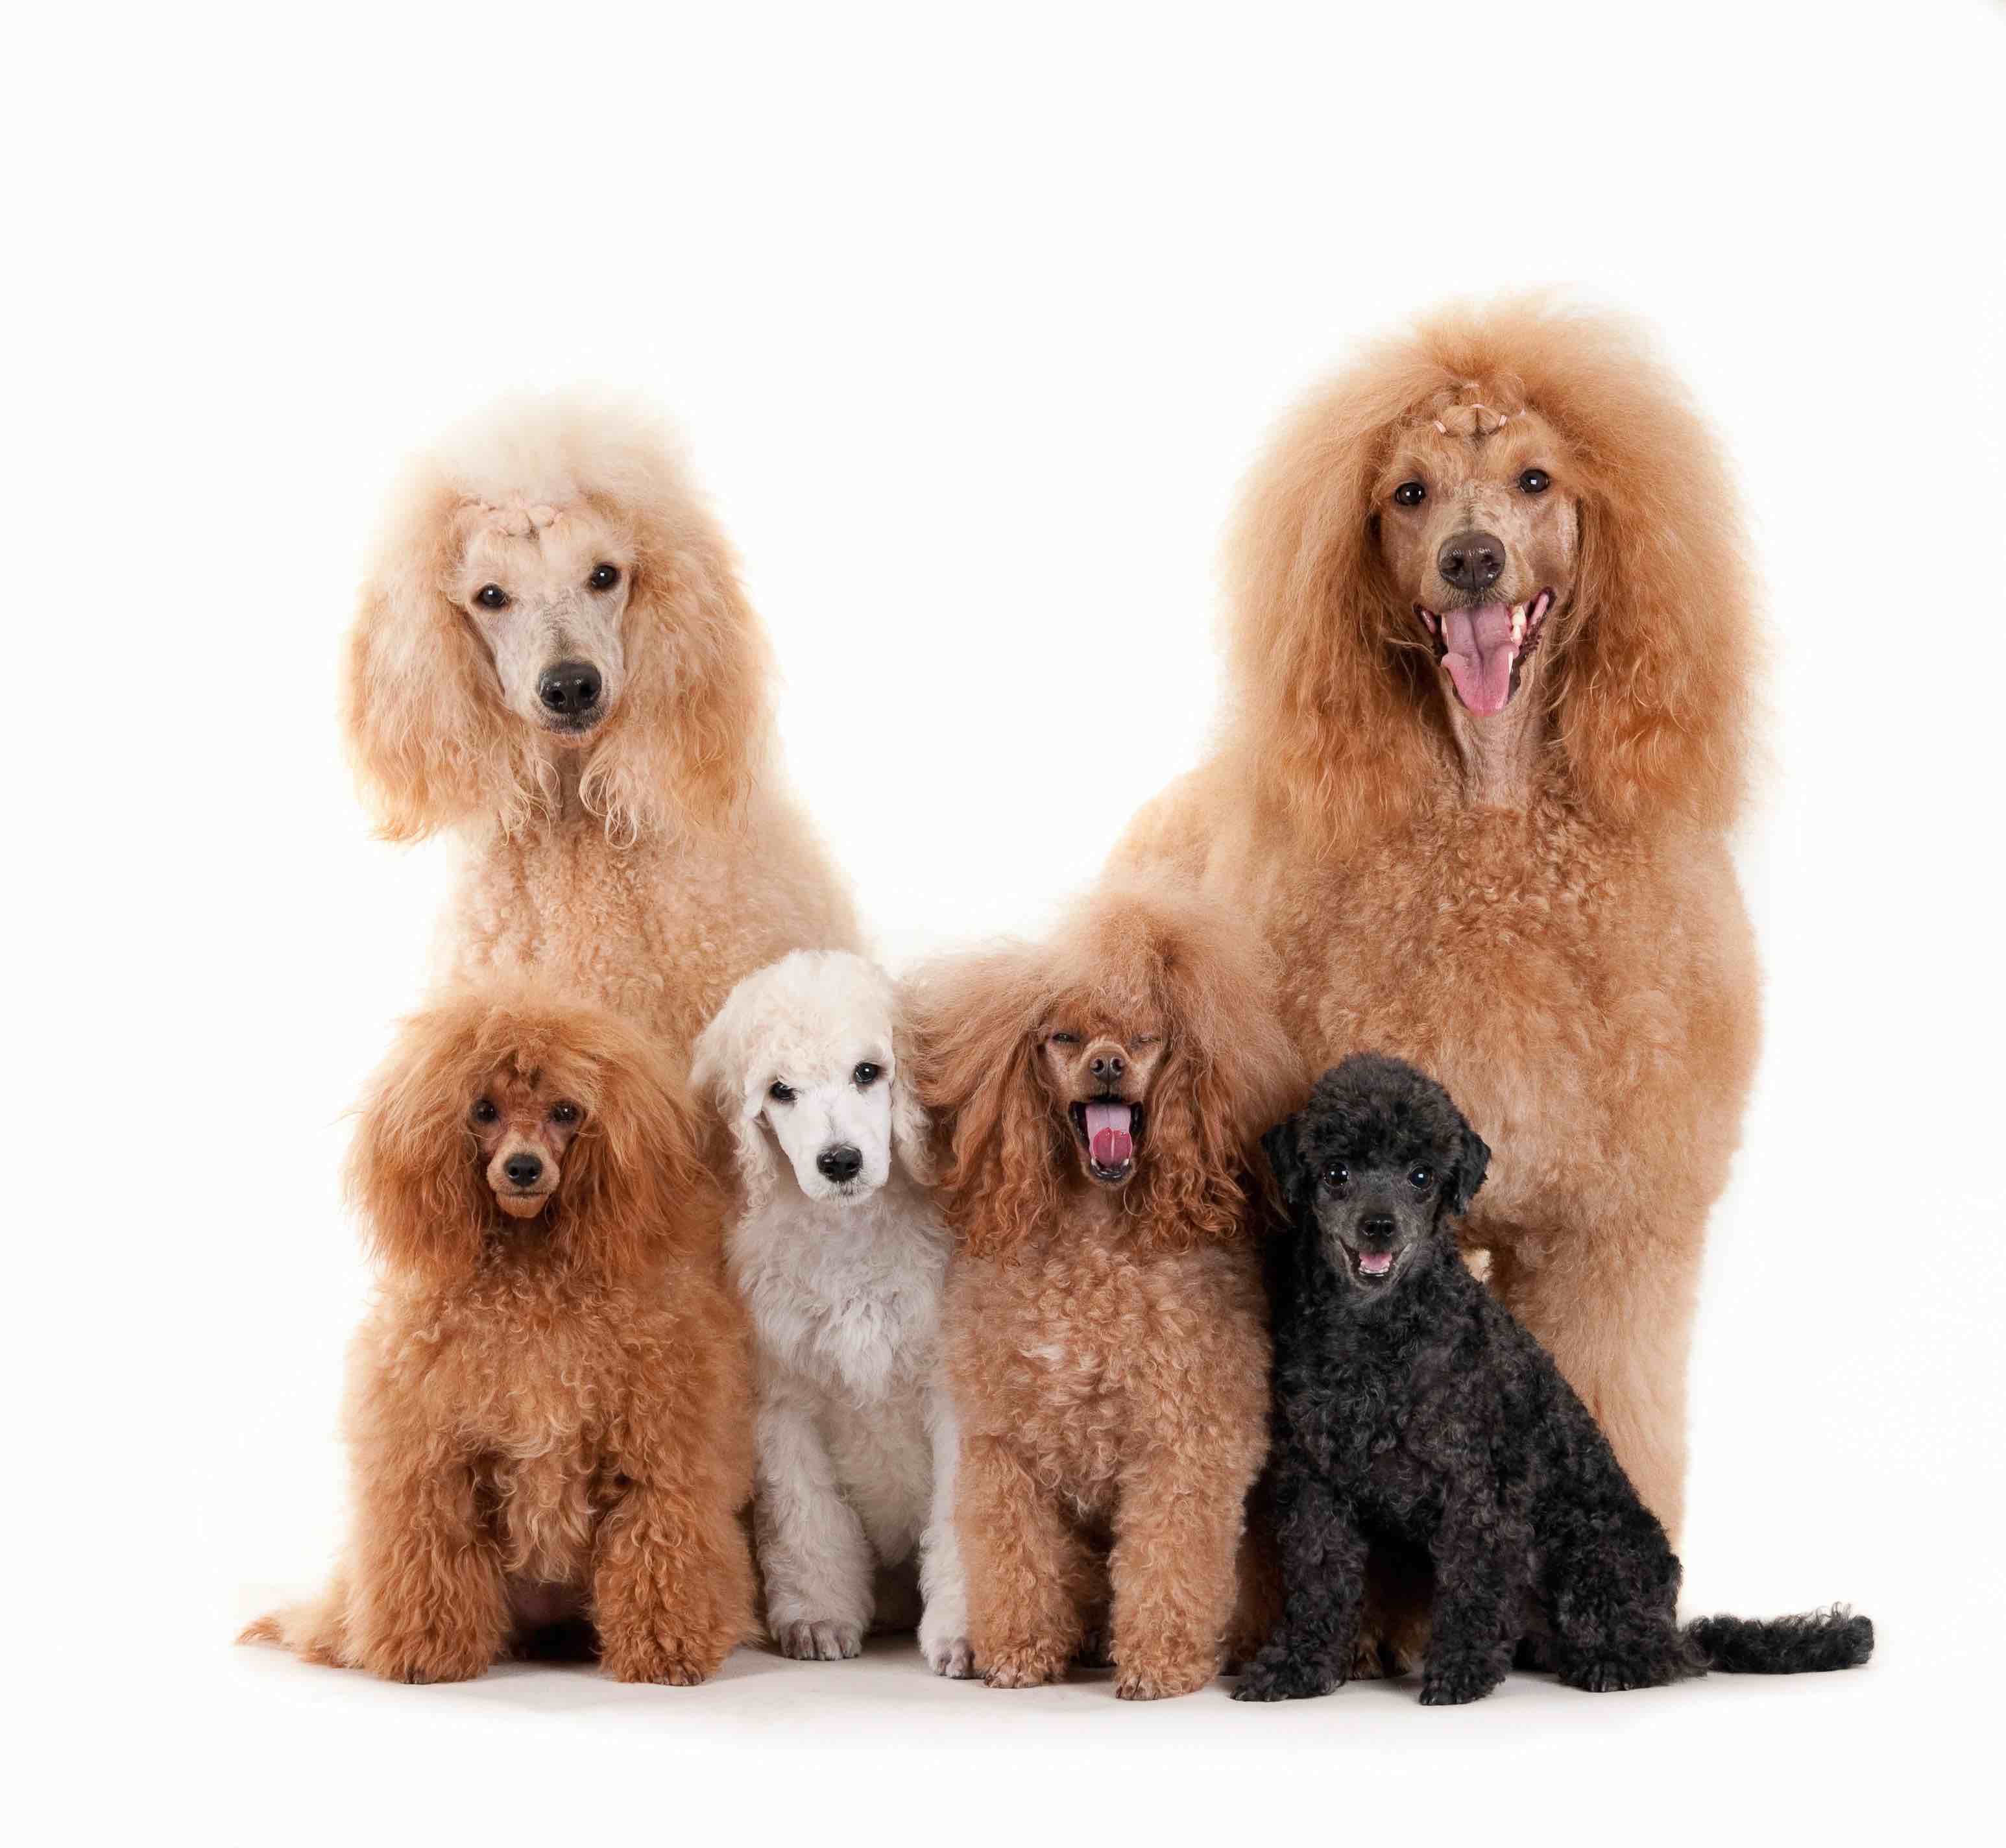 oseup shot of standard poodles family isolated on white background